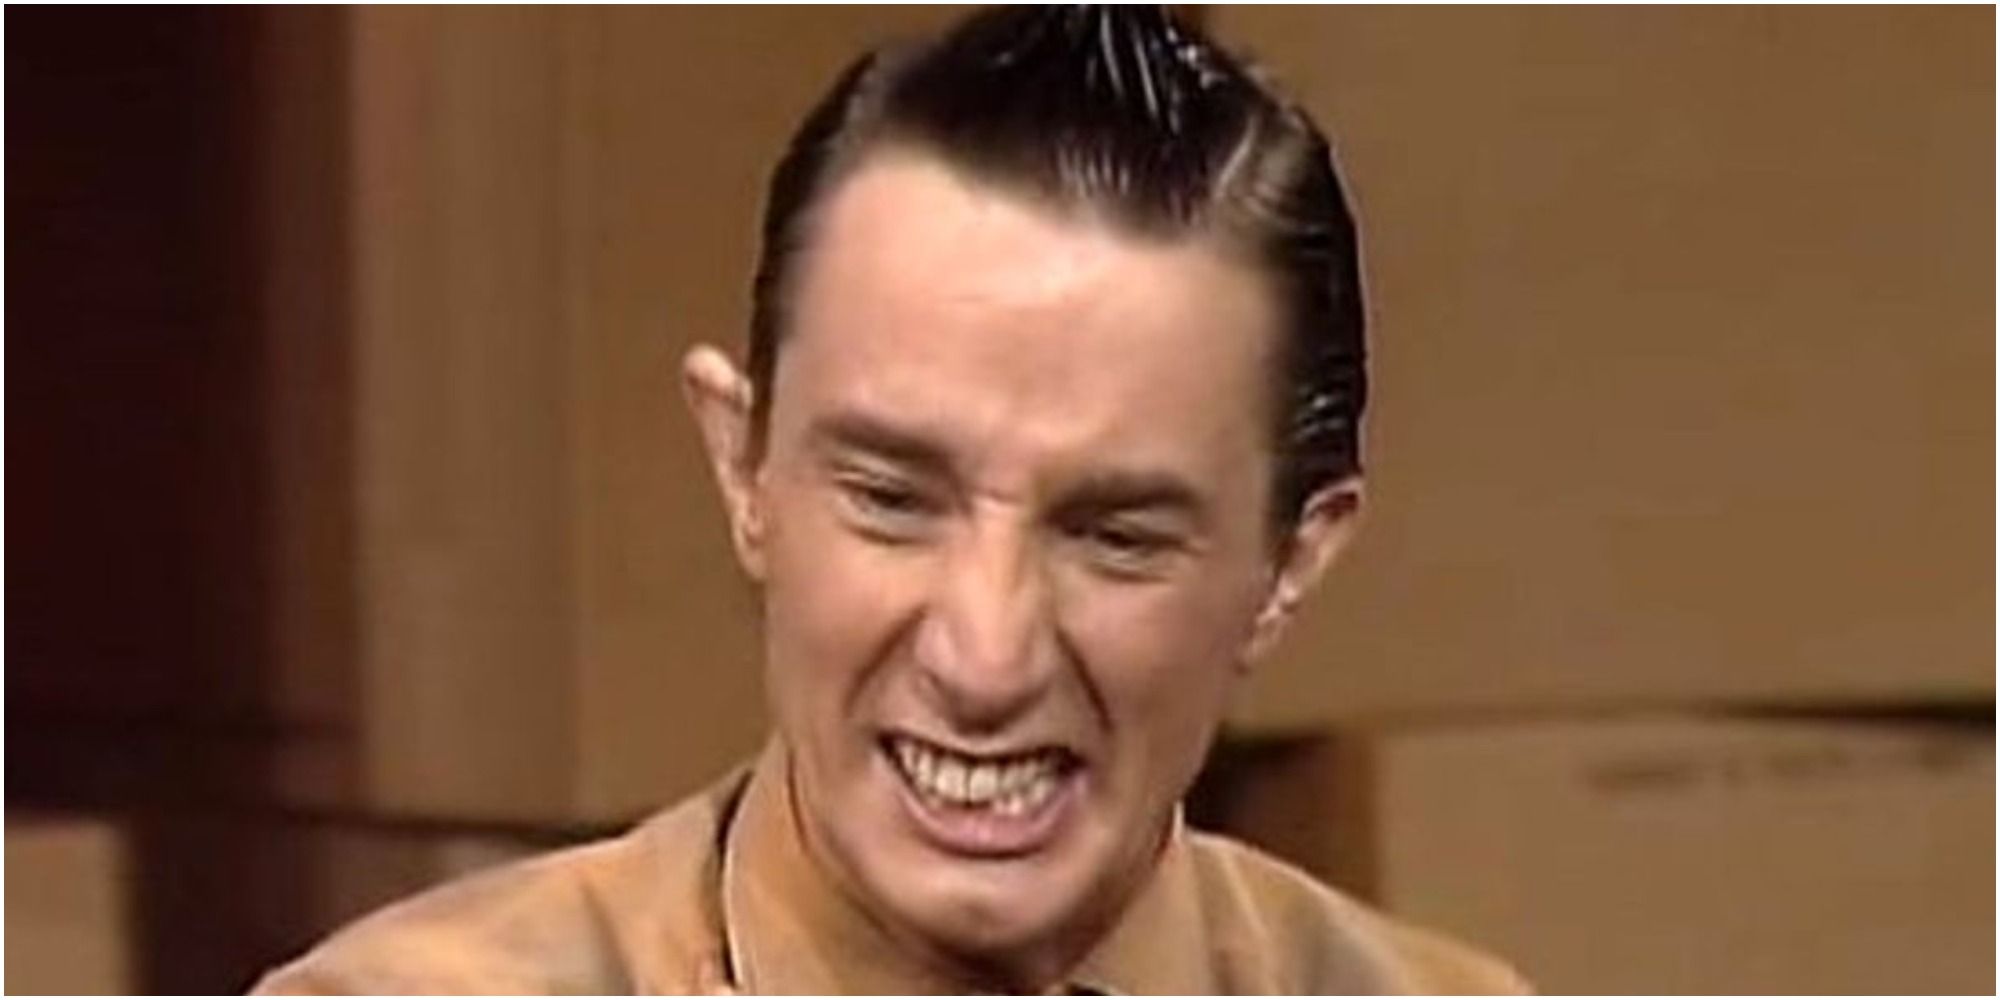 Martin Short playing Ed Grimley in 'The Contestant' sketch on SNL, making an awkward smile with spiked up hair